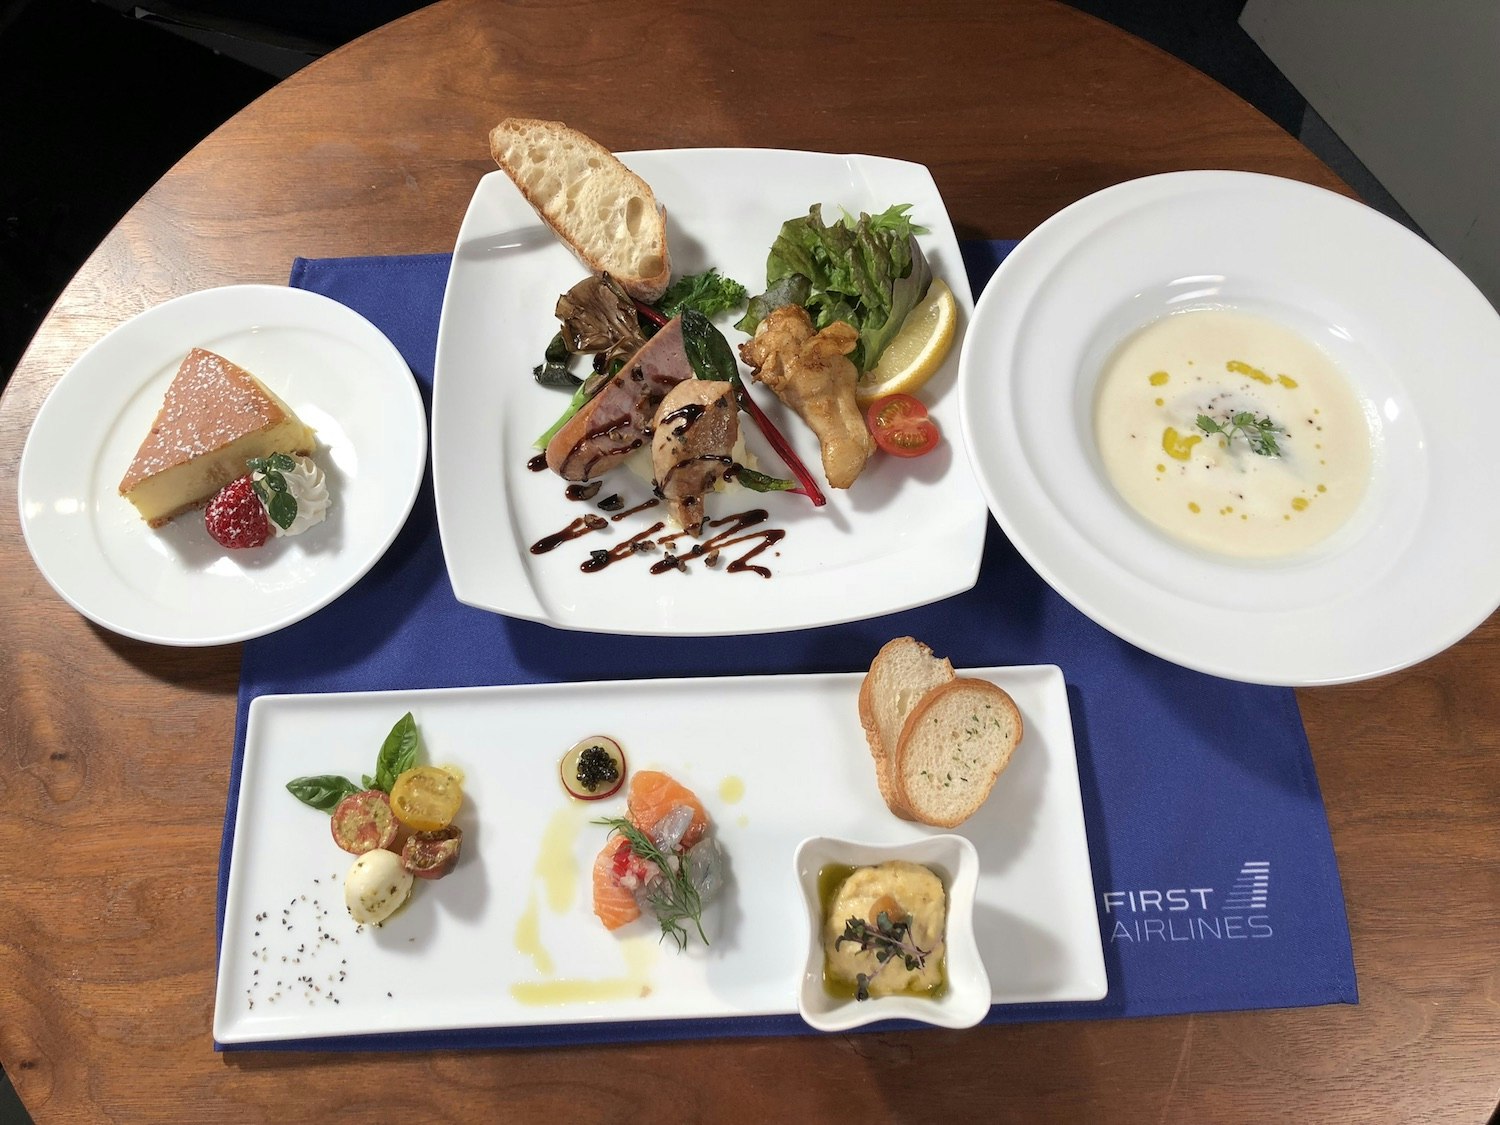 Travel News - First Airlines Food